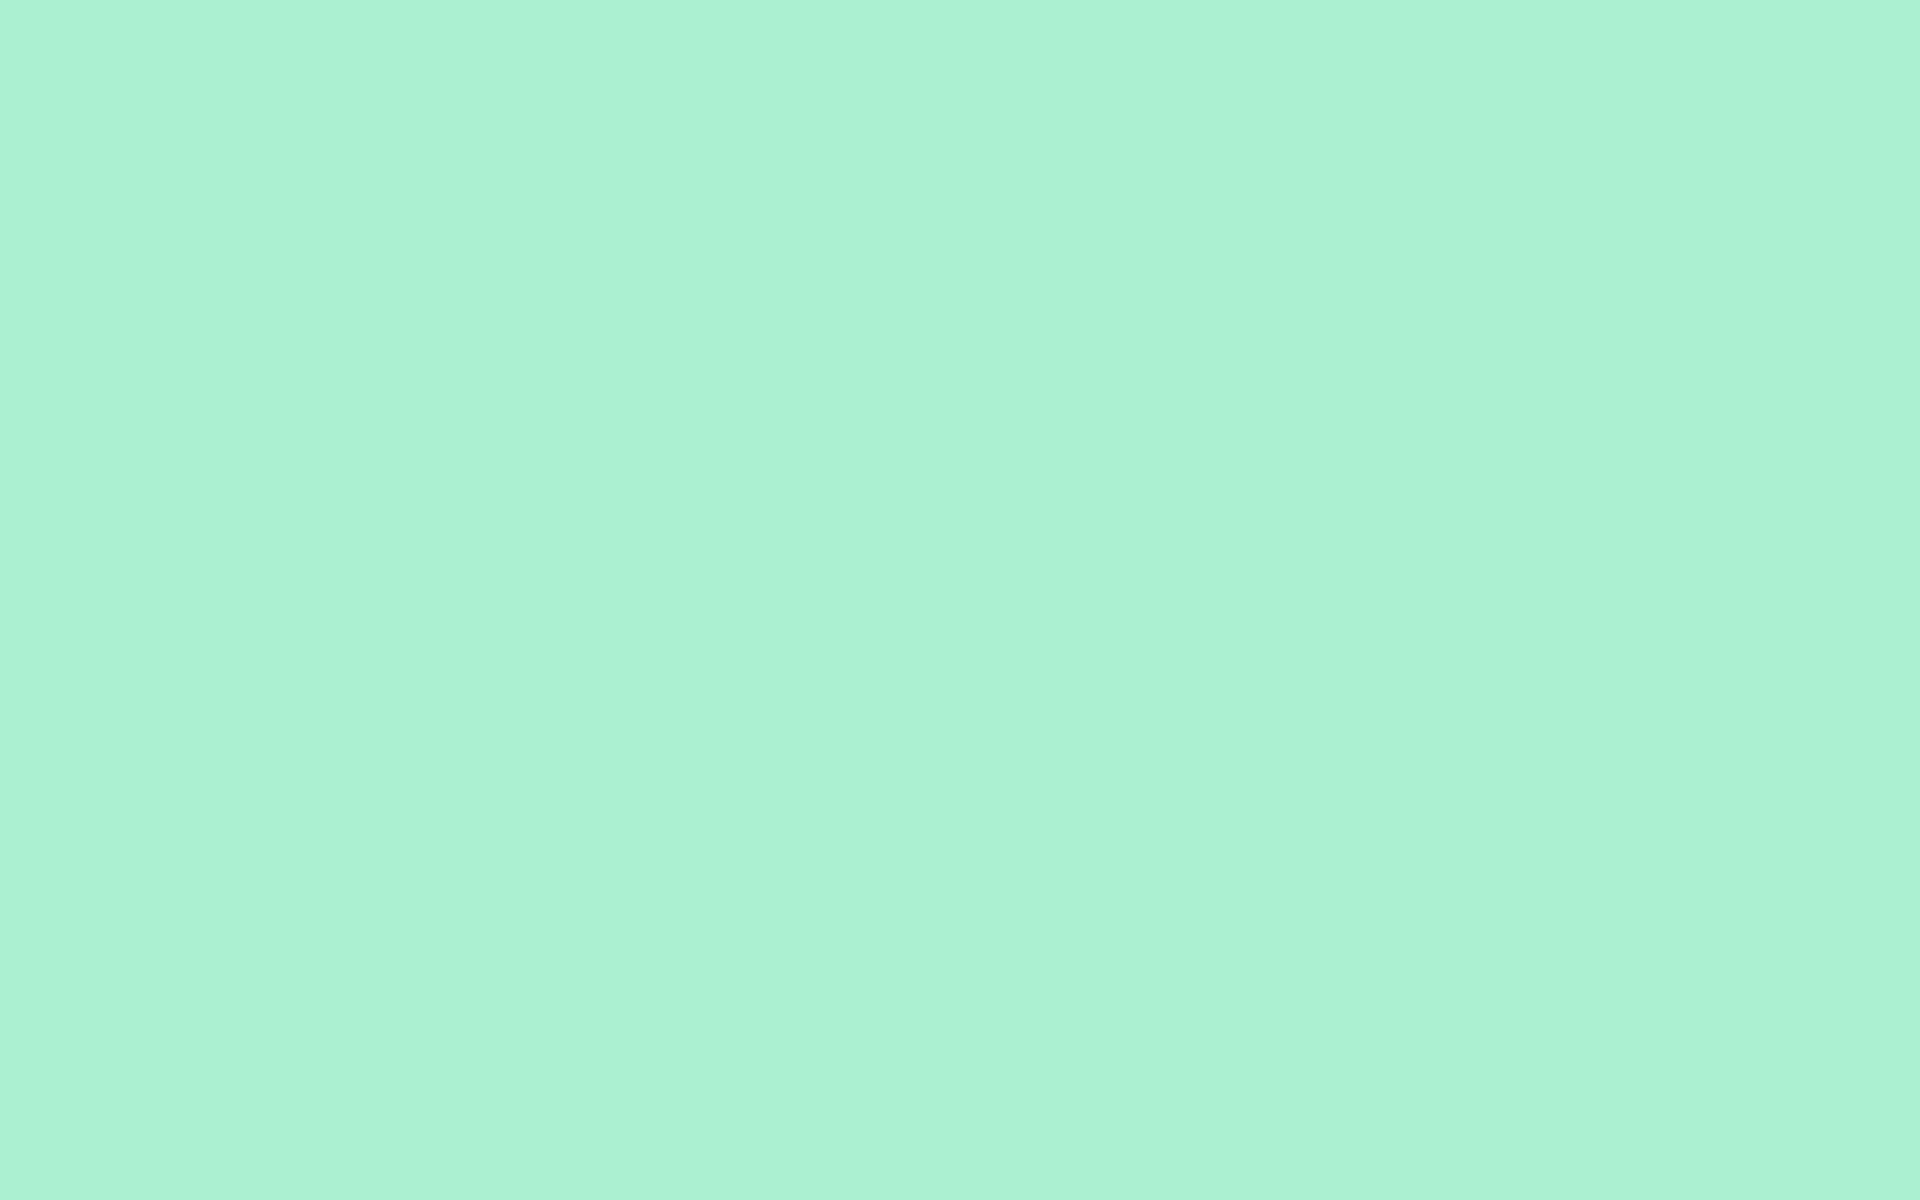 A Dreamy Pastel Green Background